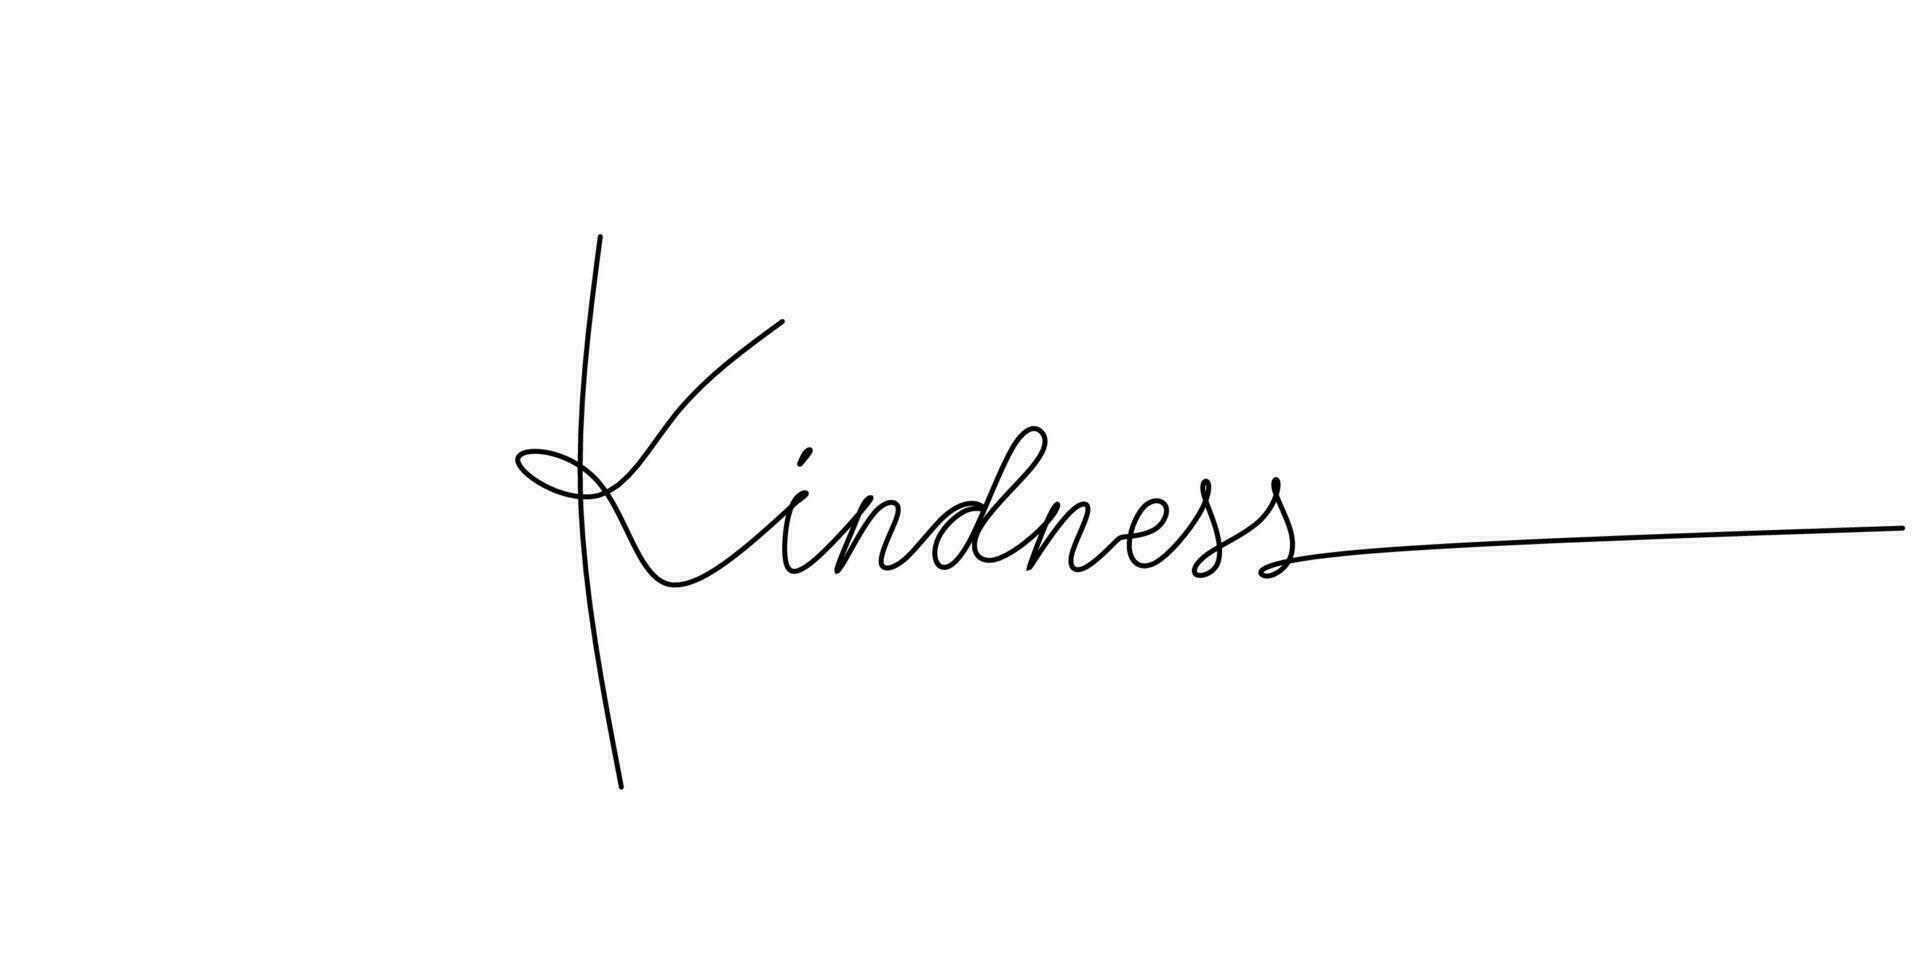 One continuous line drawing typography line art of kindness word vector